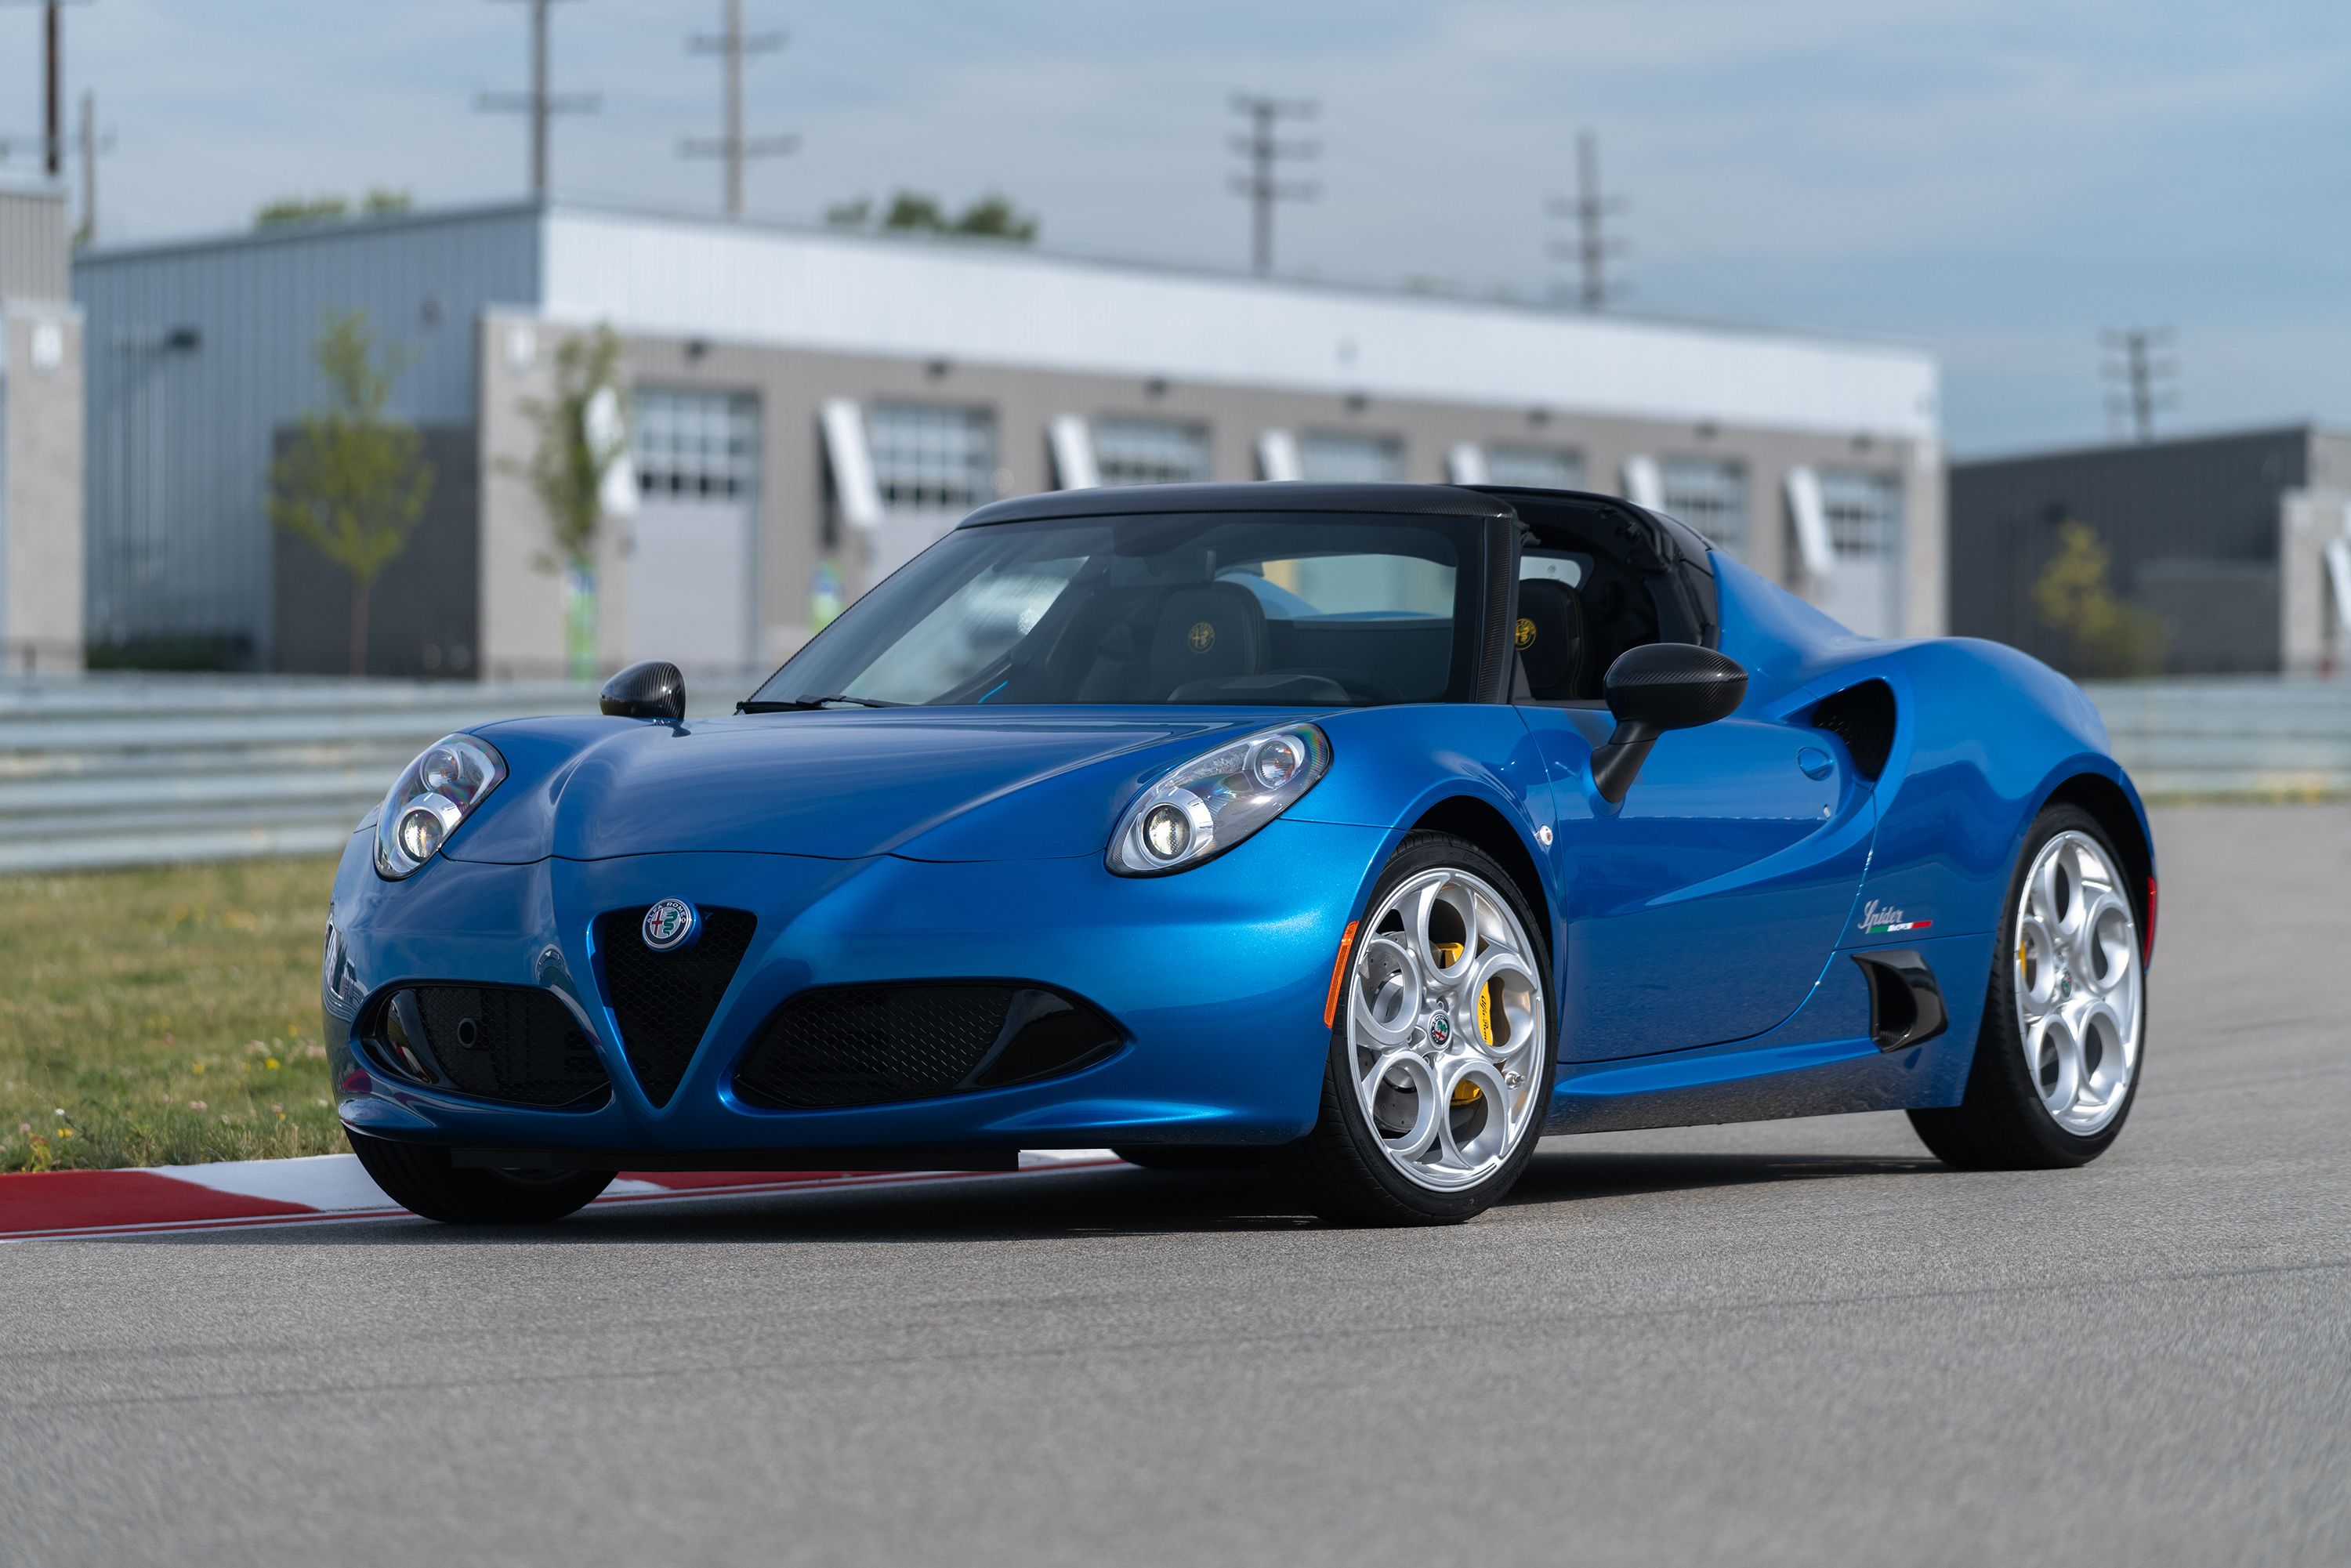 2019 The 2020 Alfa Romeo 4C Spider Italia Is the Best-Looking Debut at the 2019 Chicago Auto Show, But Is It Too Little Too Late?